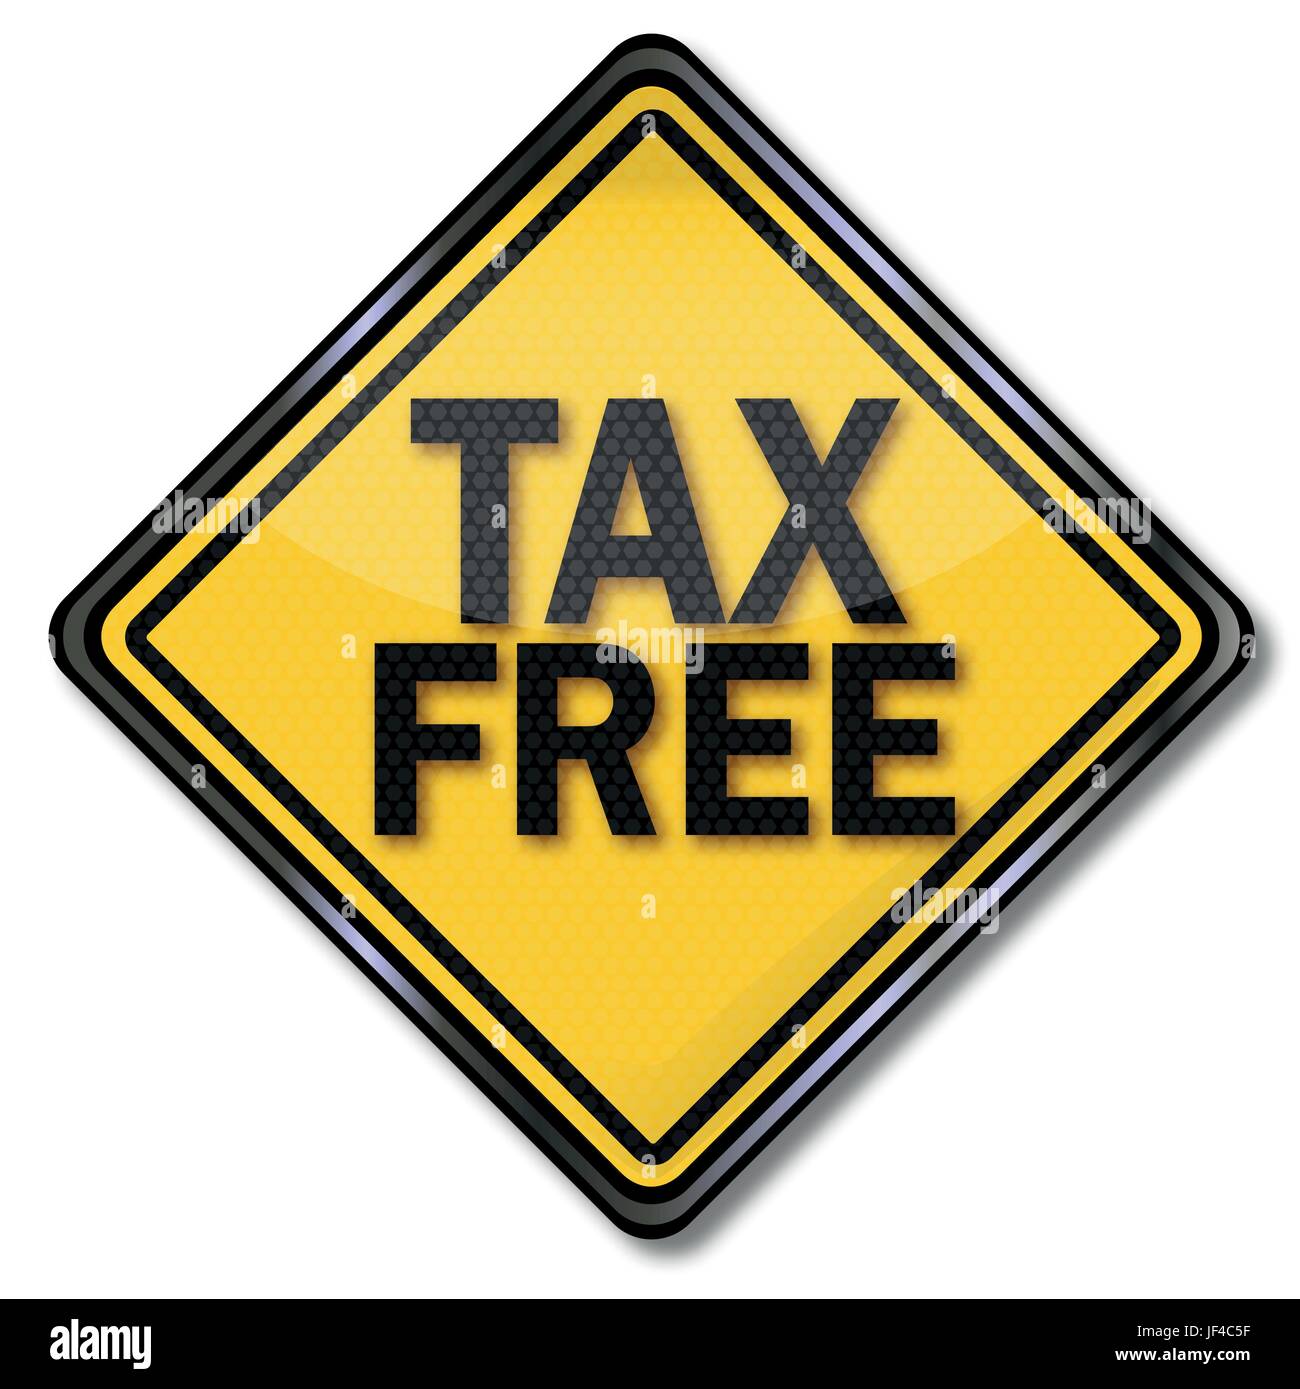 freedom, liberty, free, steer, tax, inexpensive, cheap, affordable, tax-free, Stock Vector